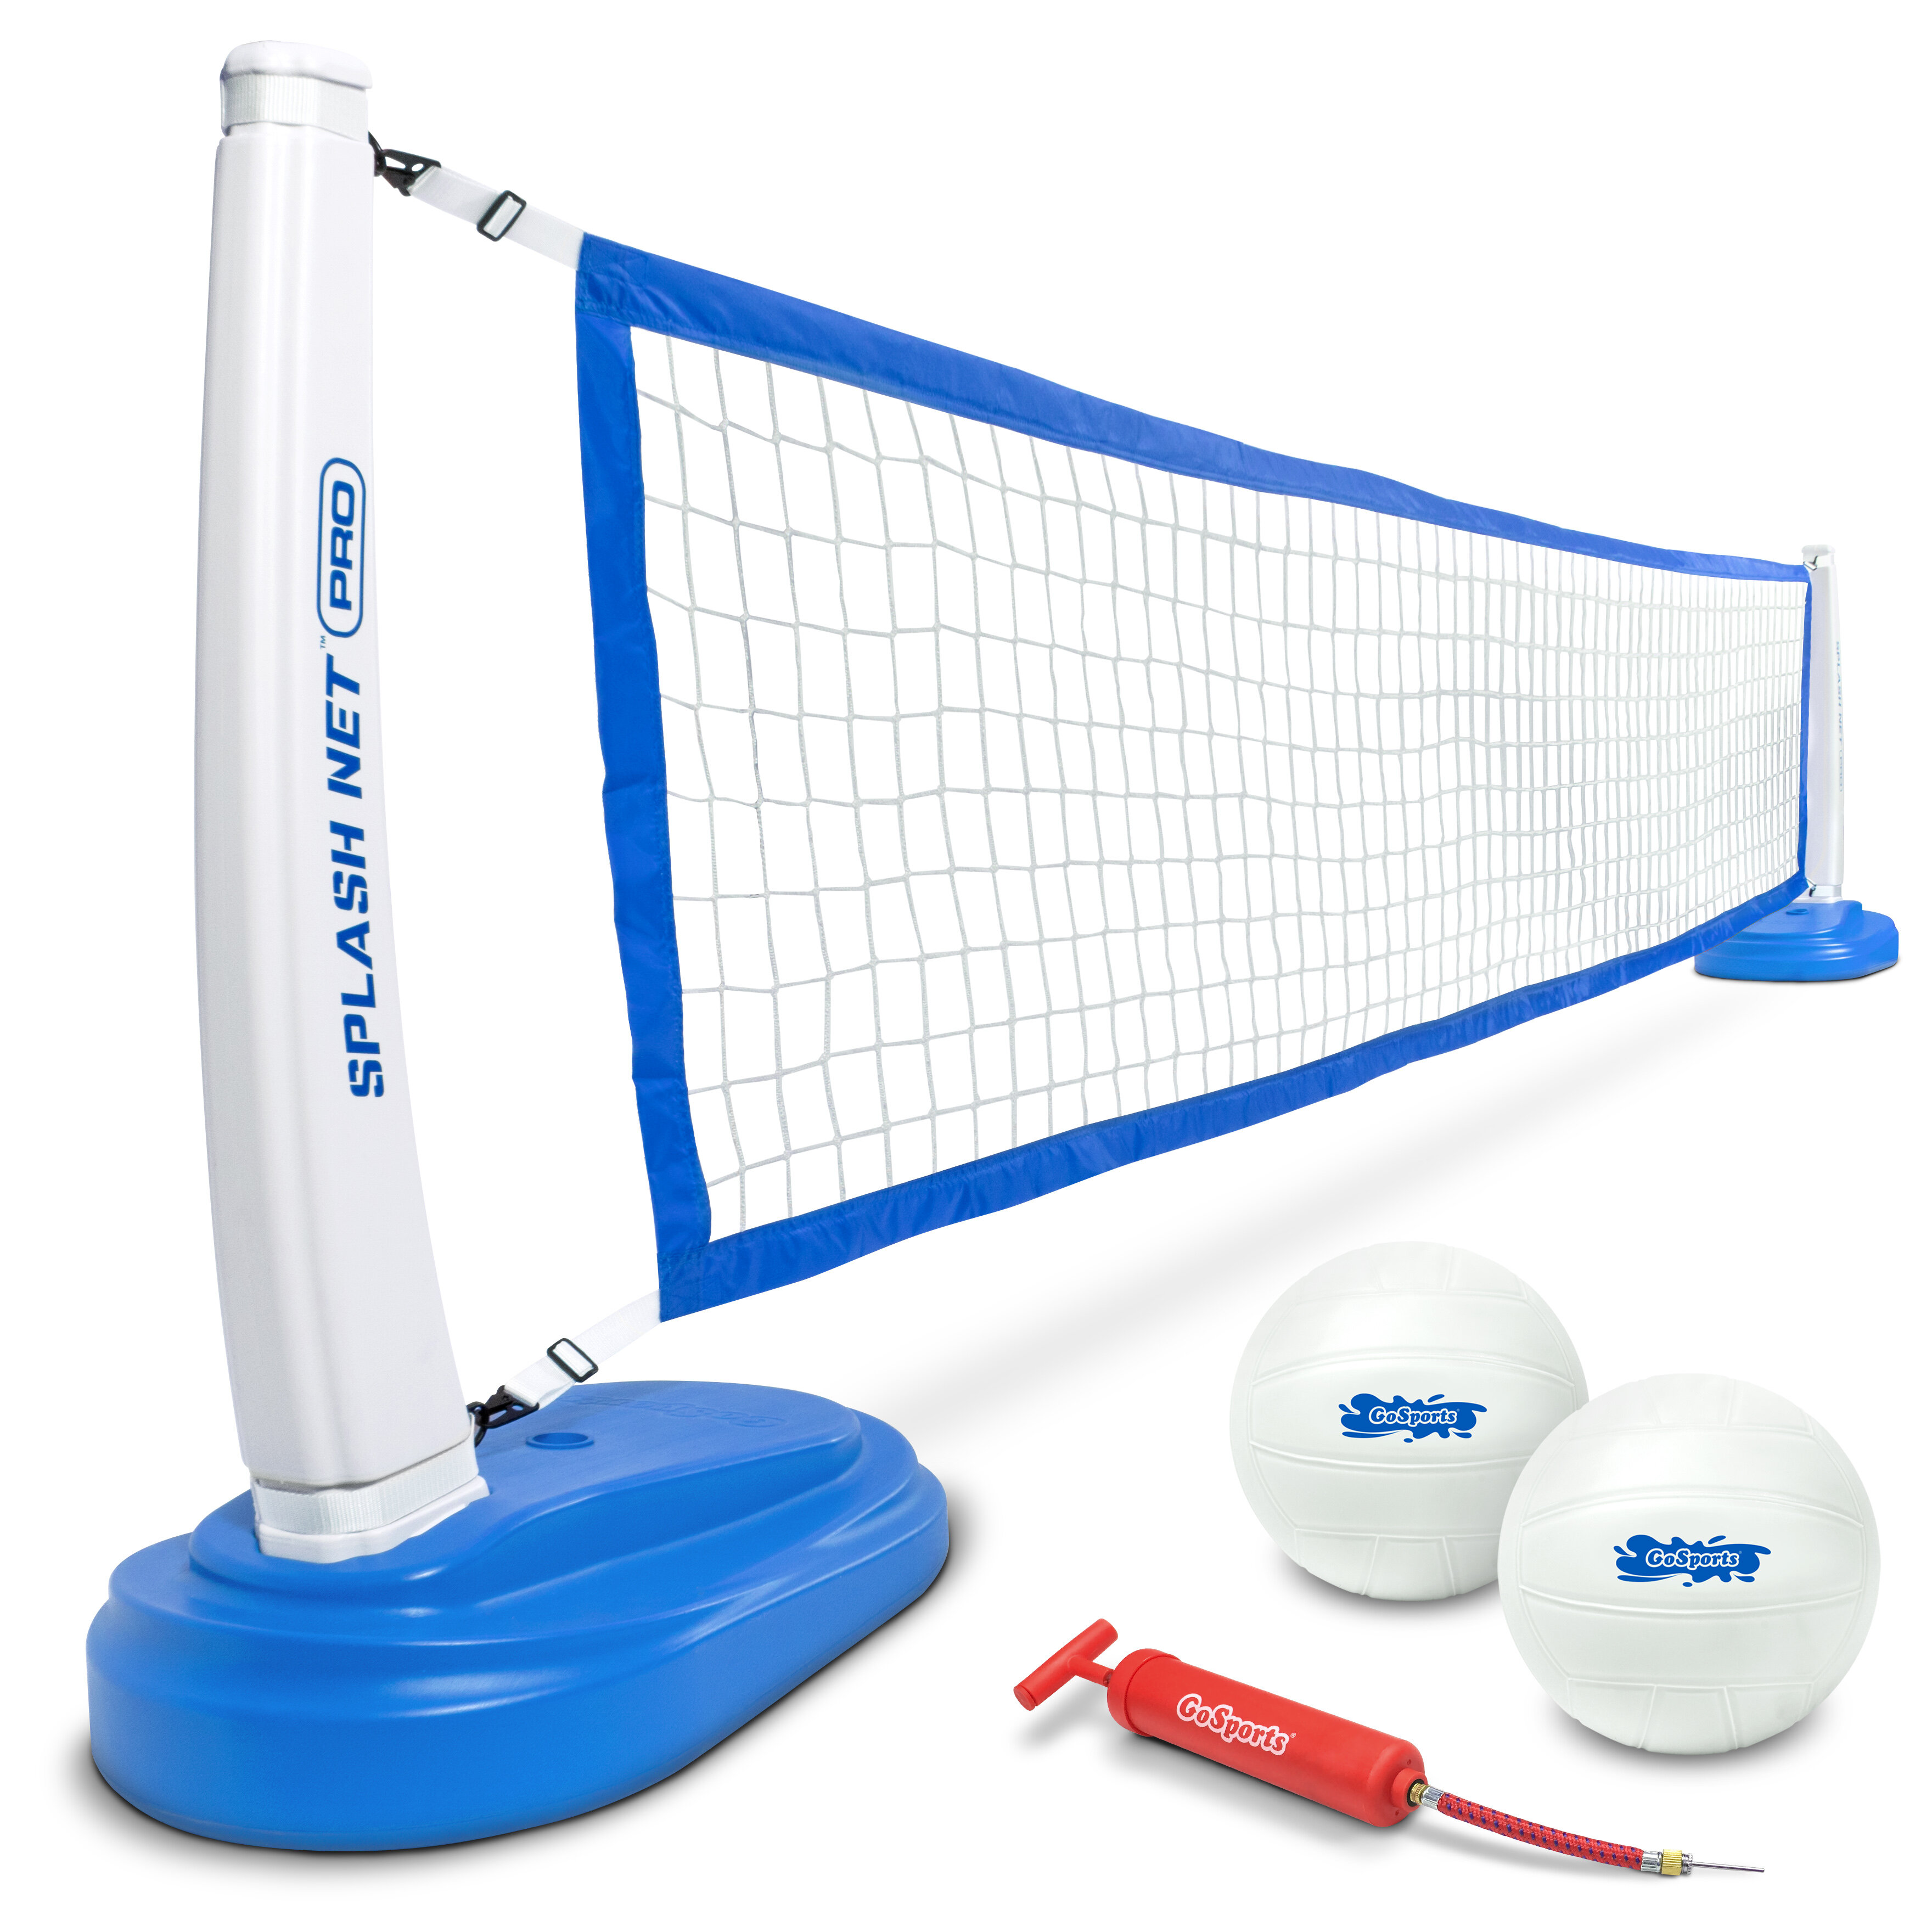 Patiassy Professional Volleyball Net Set with 2'' Aluminum Poles